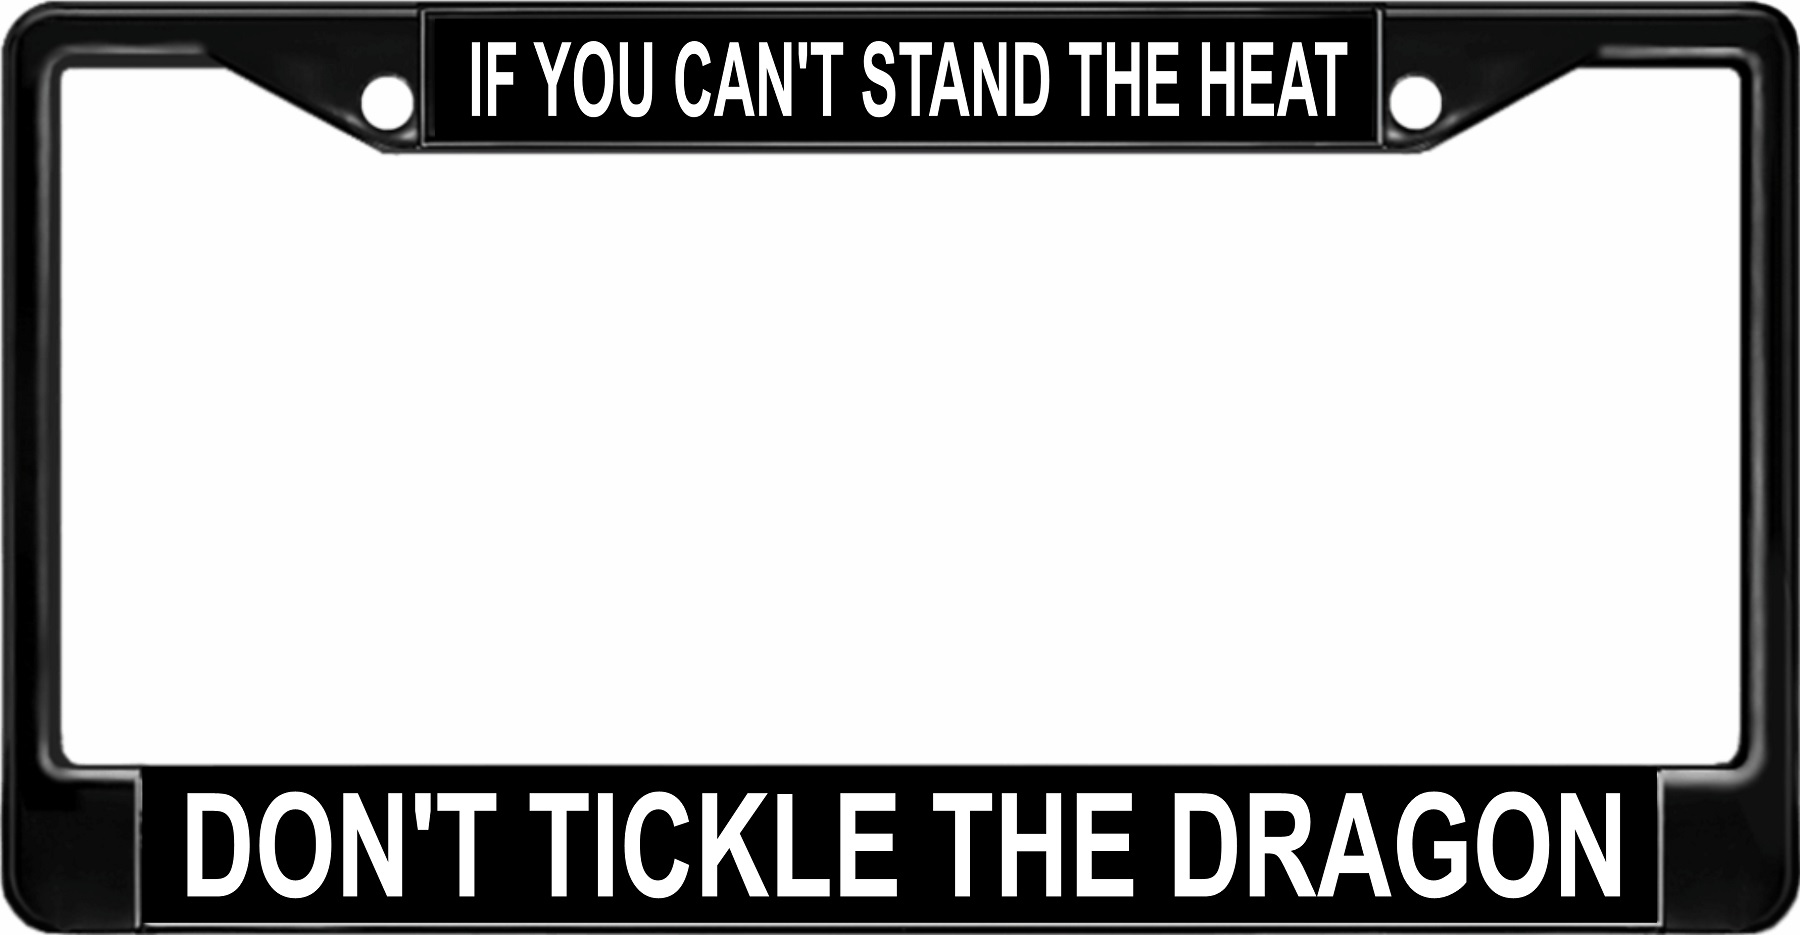 Can't Stand The Heat? Don't Tickle The DRAGON Black License Plate Frame